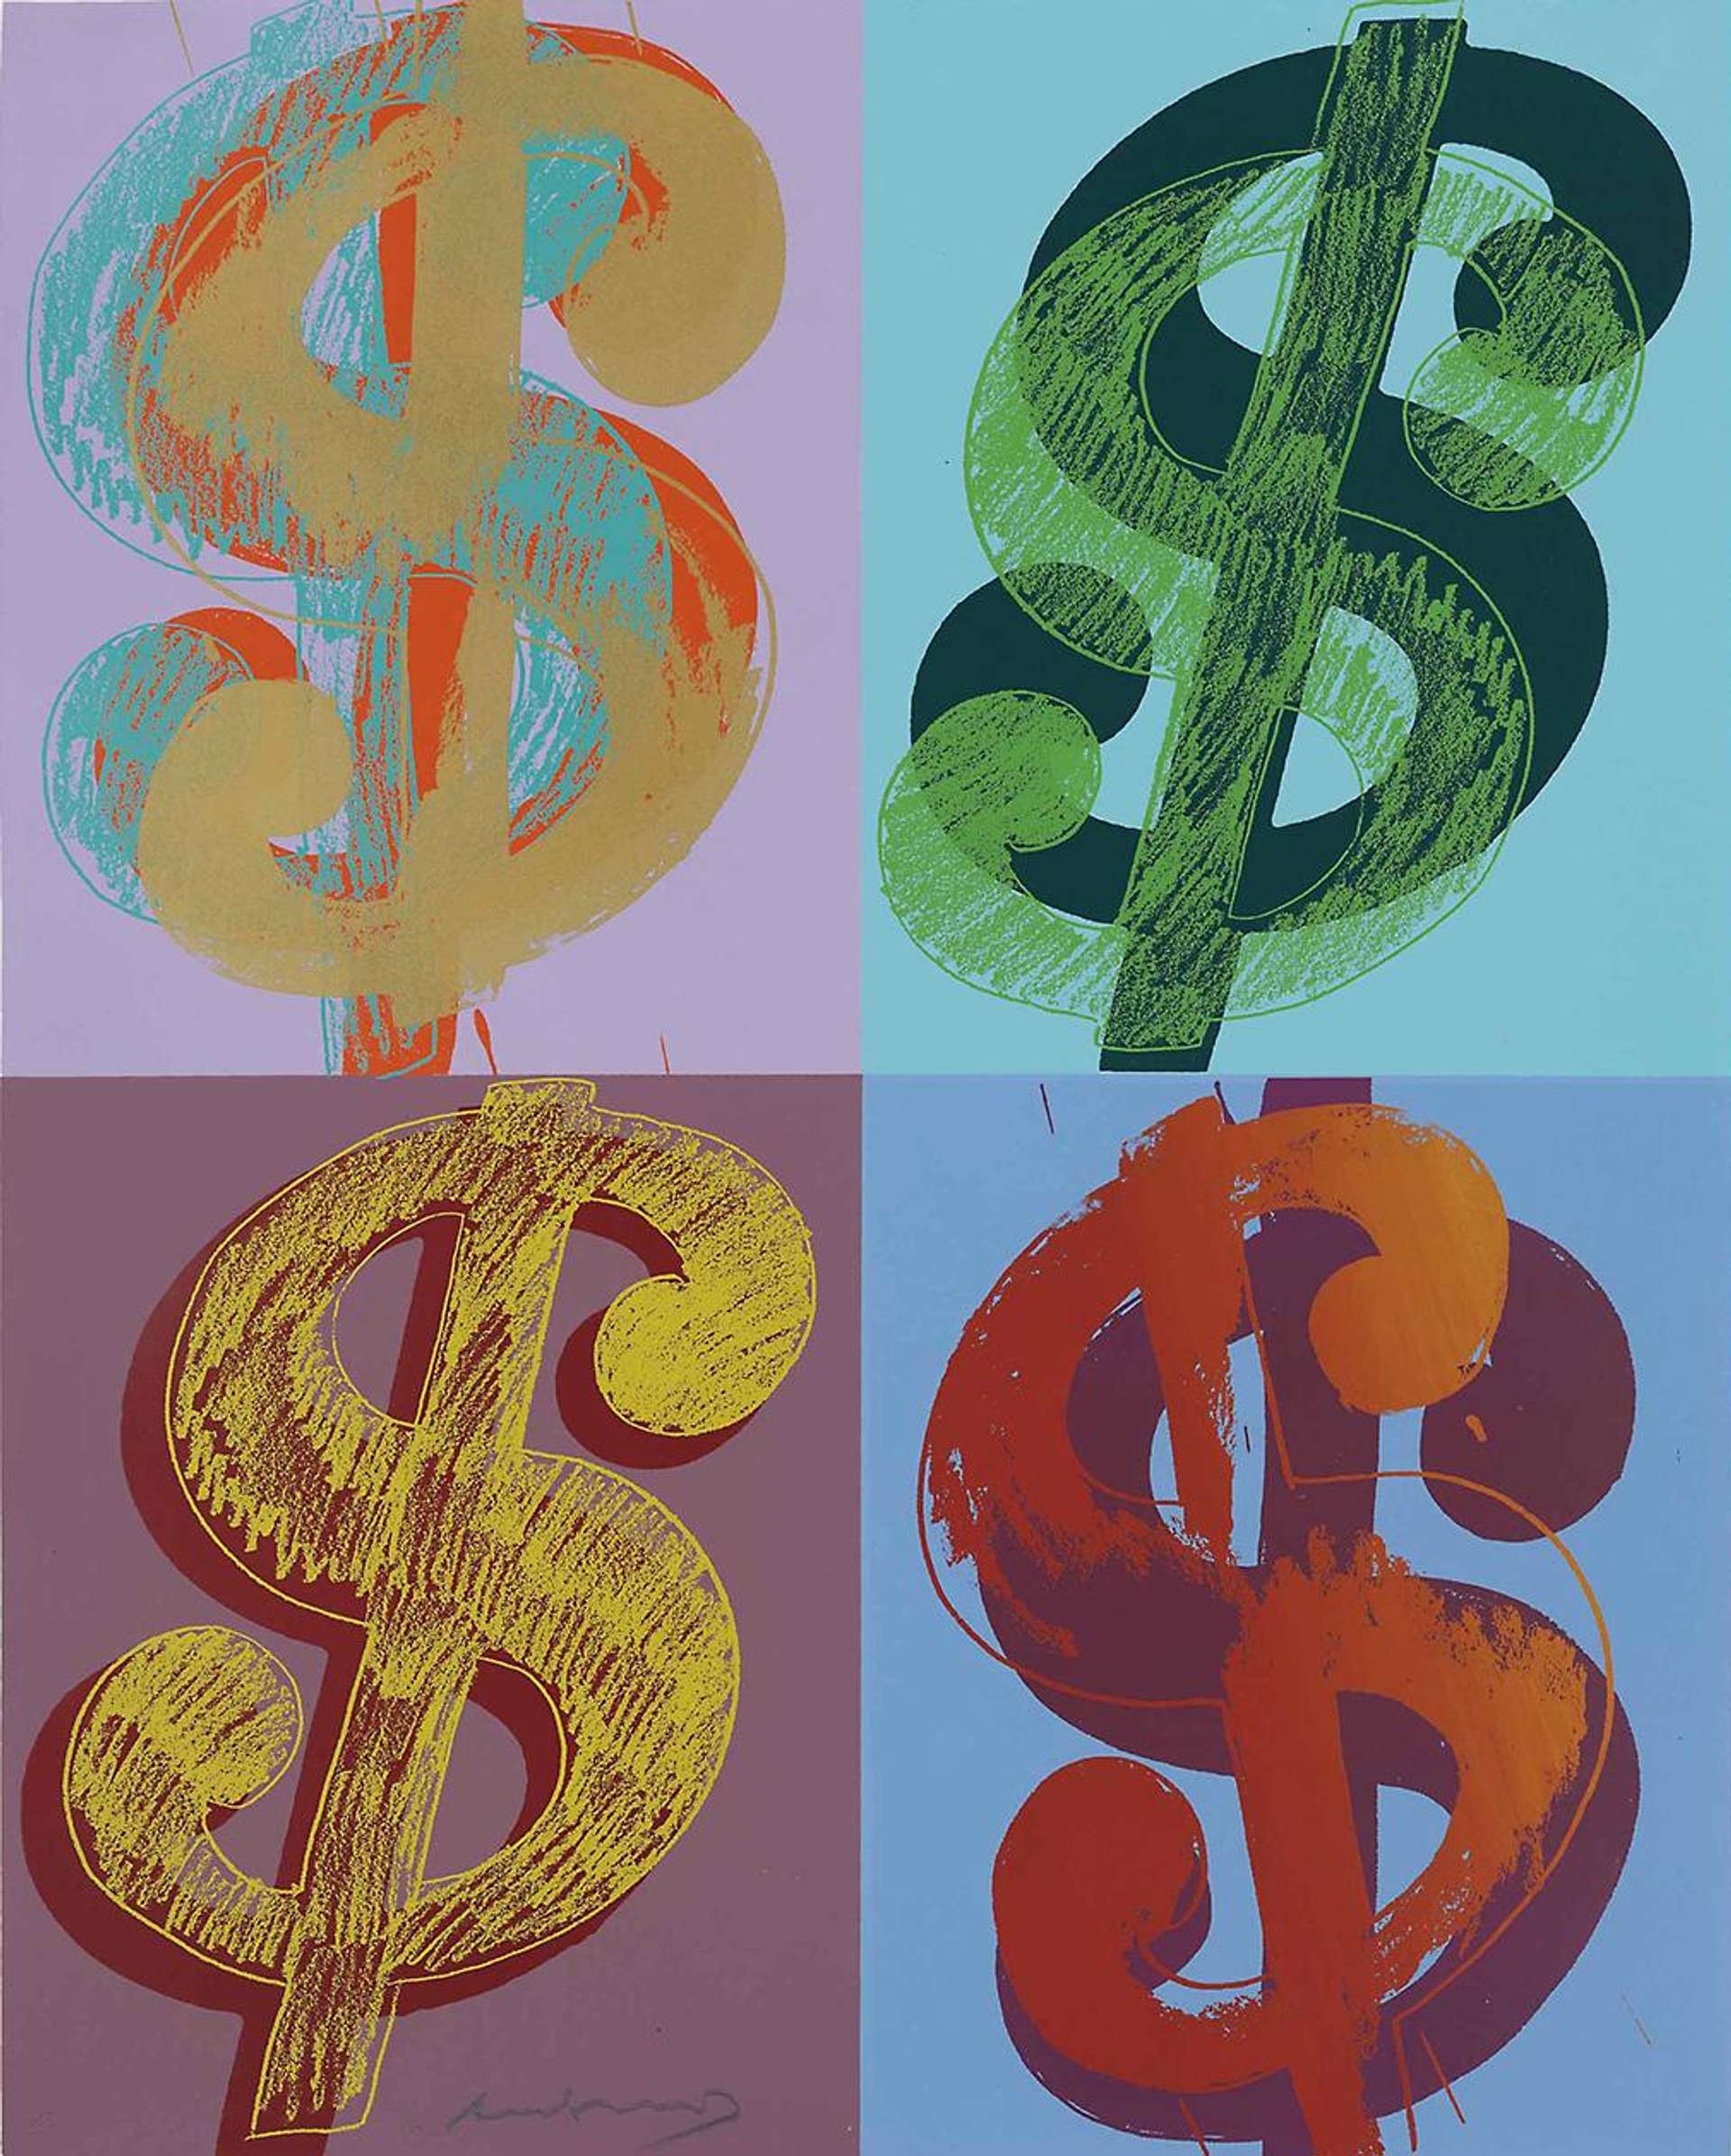 An image of the artwork Dollar sign Quad by Andy Warhol, which depicts four stylised dollar signs in different colour gradients.